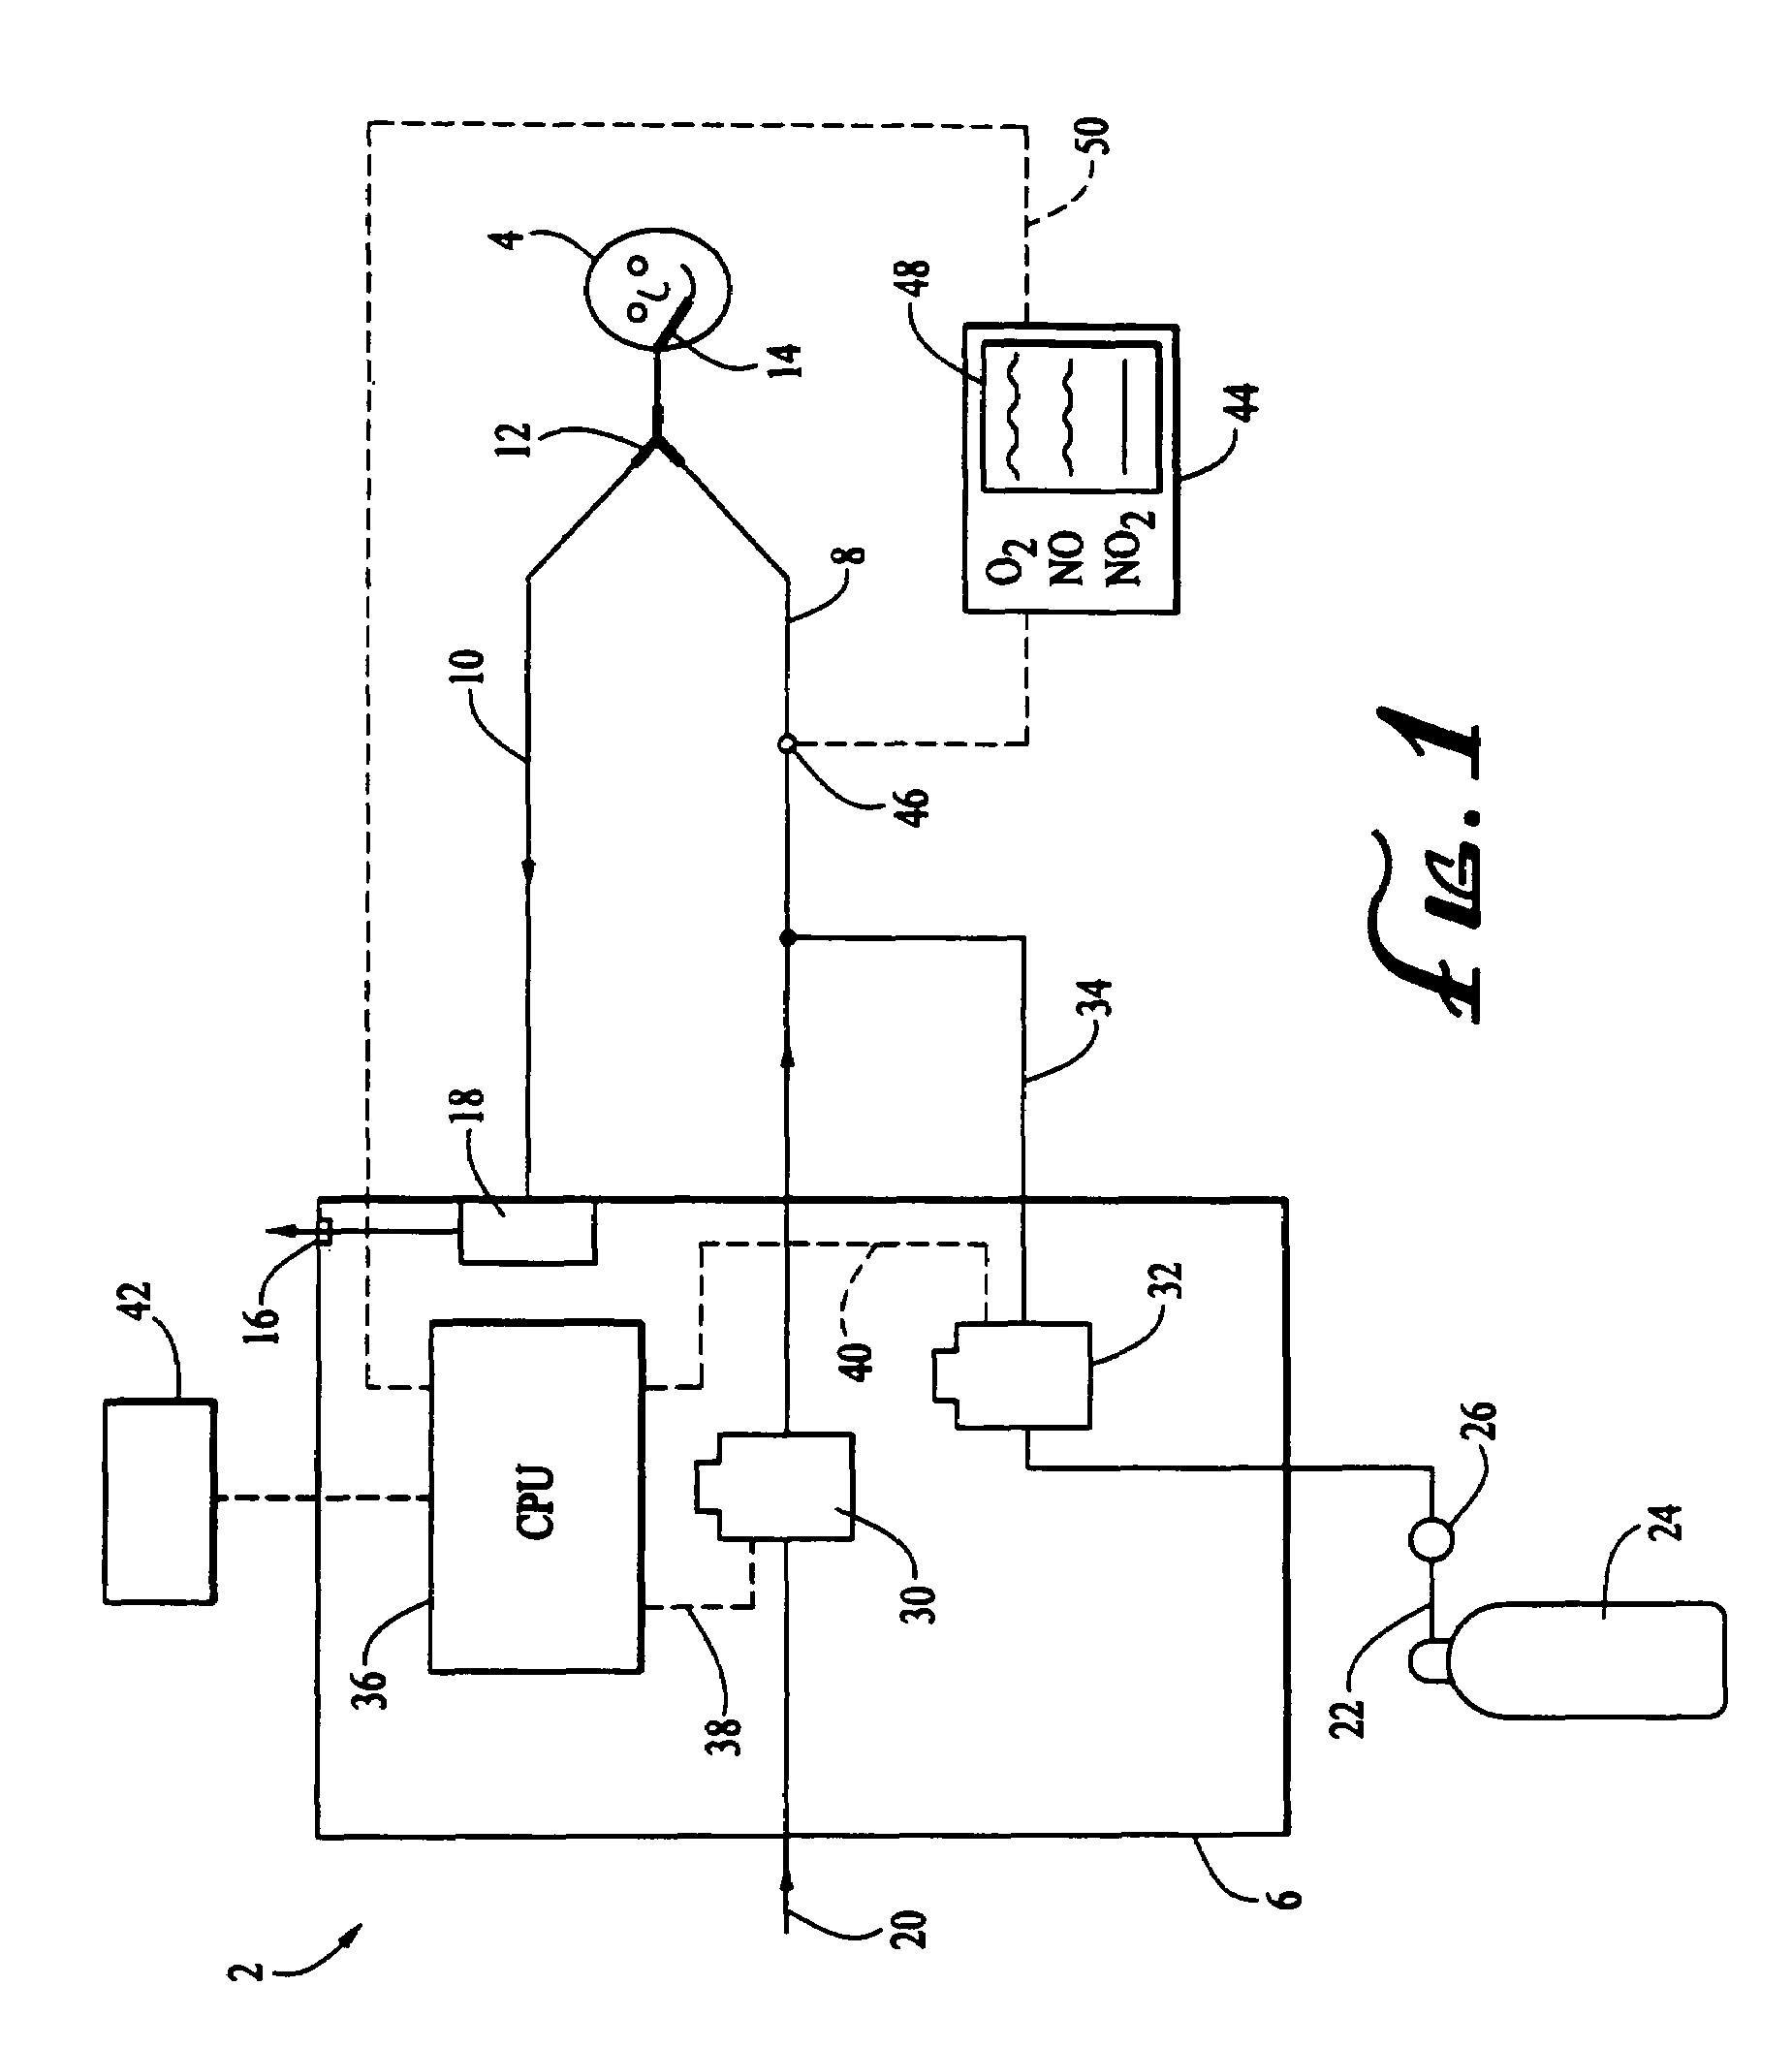 Method and apparatus for delivery of inhaled nitric oxide to spontaneous-breathing and mechanically-ventilated patients with intermittent dosing